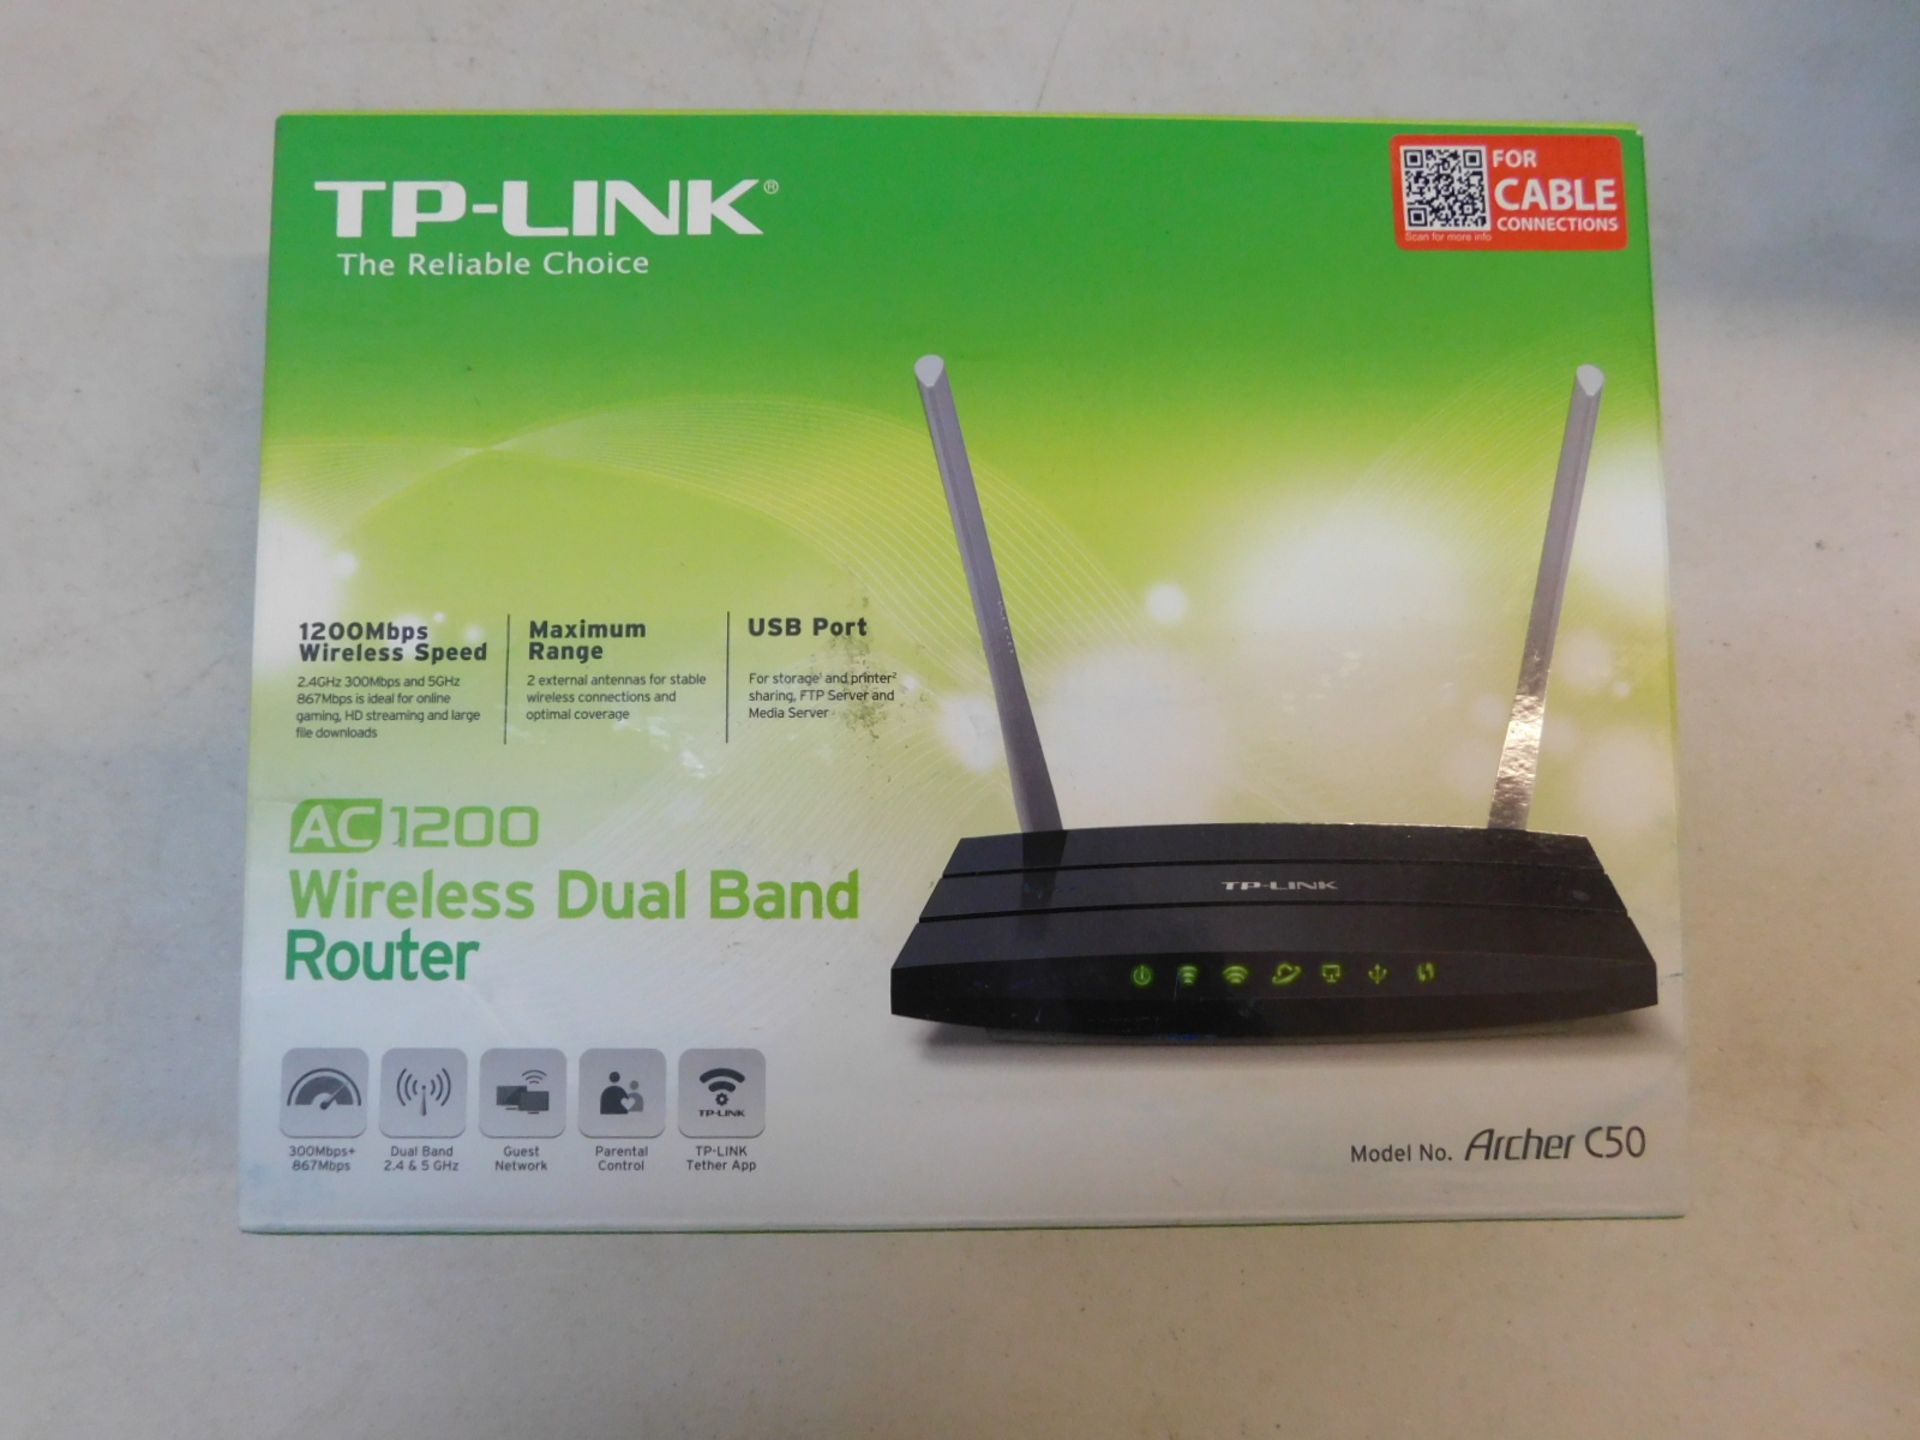 1 BOXED TP-LINK AC1200 WIRELESS DUAL BAND ROUTER MODEL ARCHER C50 RRP Â£64.99